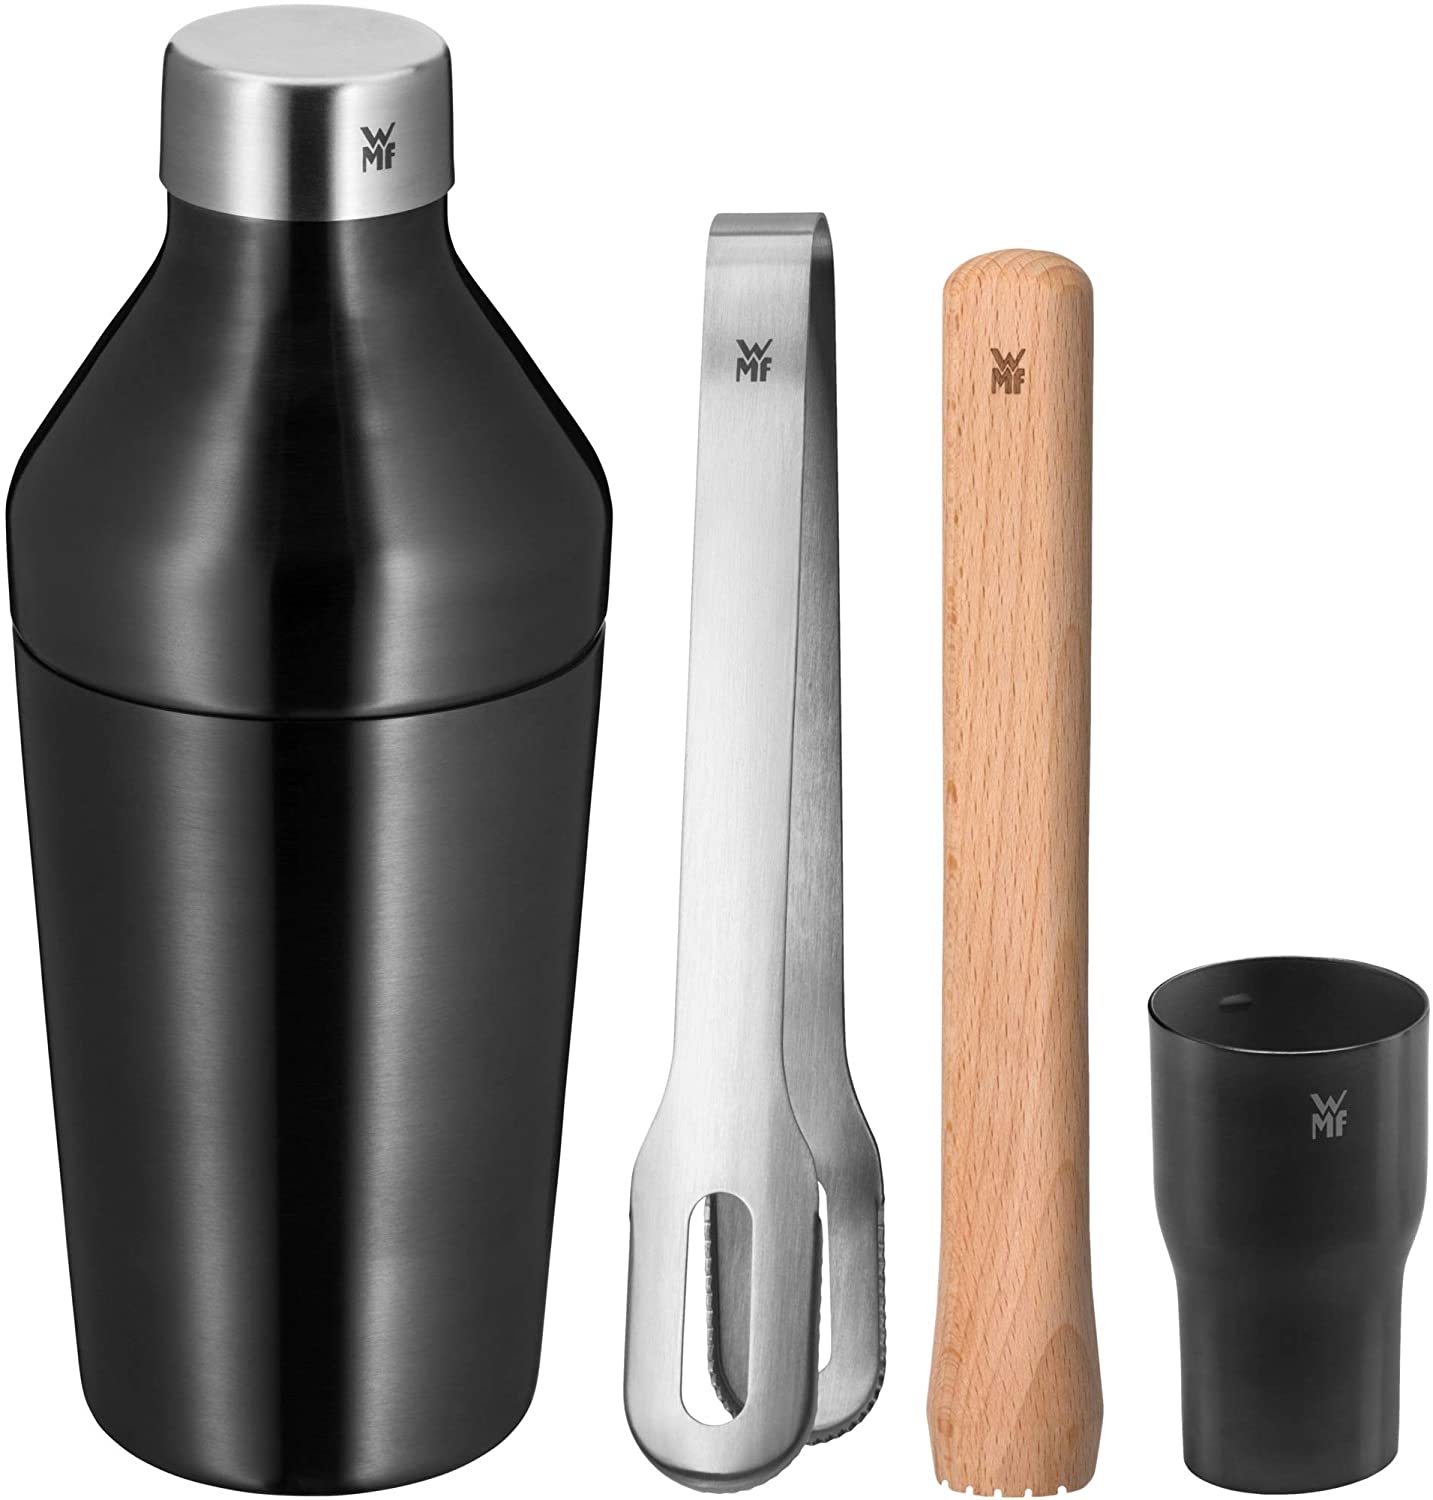 WMF Baric Cocktail Set 4 Pieces Bar Set with Stainless Steel Cocktail Shaker, Bar Measure, Ice Tongs, Wooden Pestle, Can Be Stored Inside, Gift Box